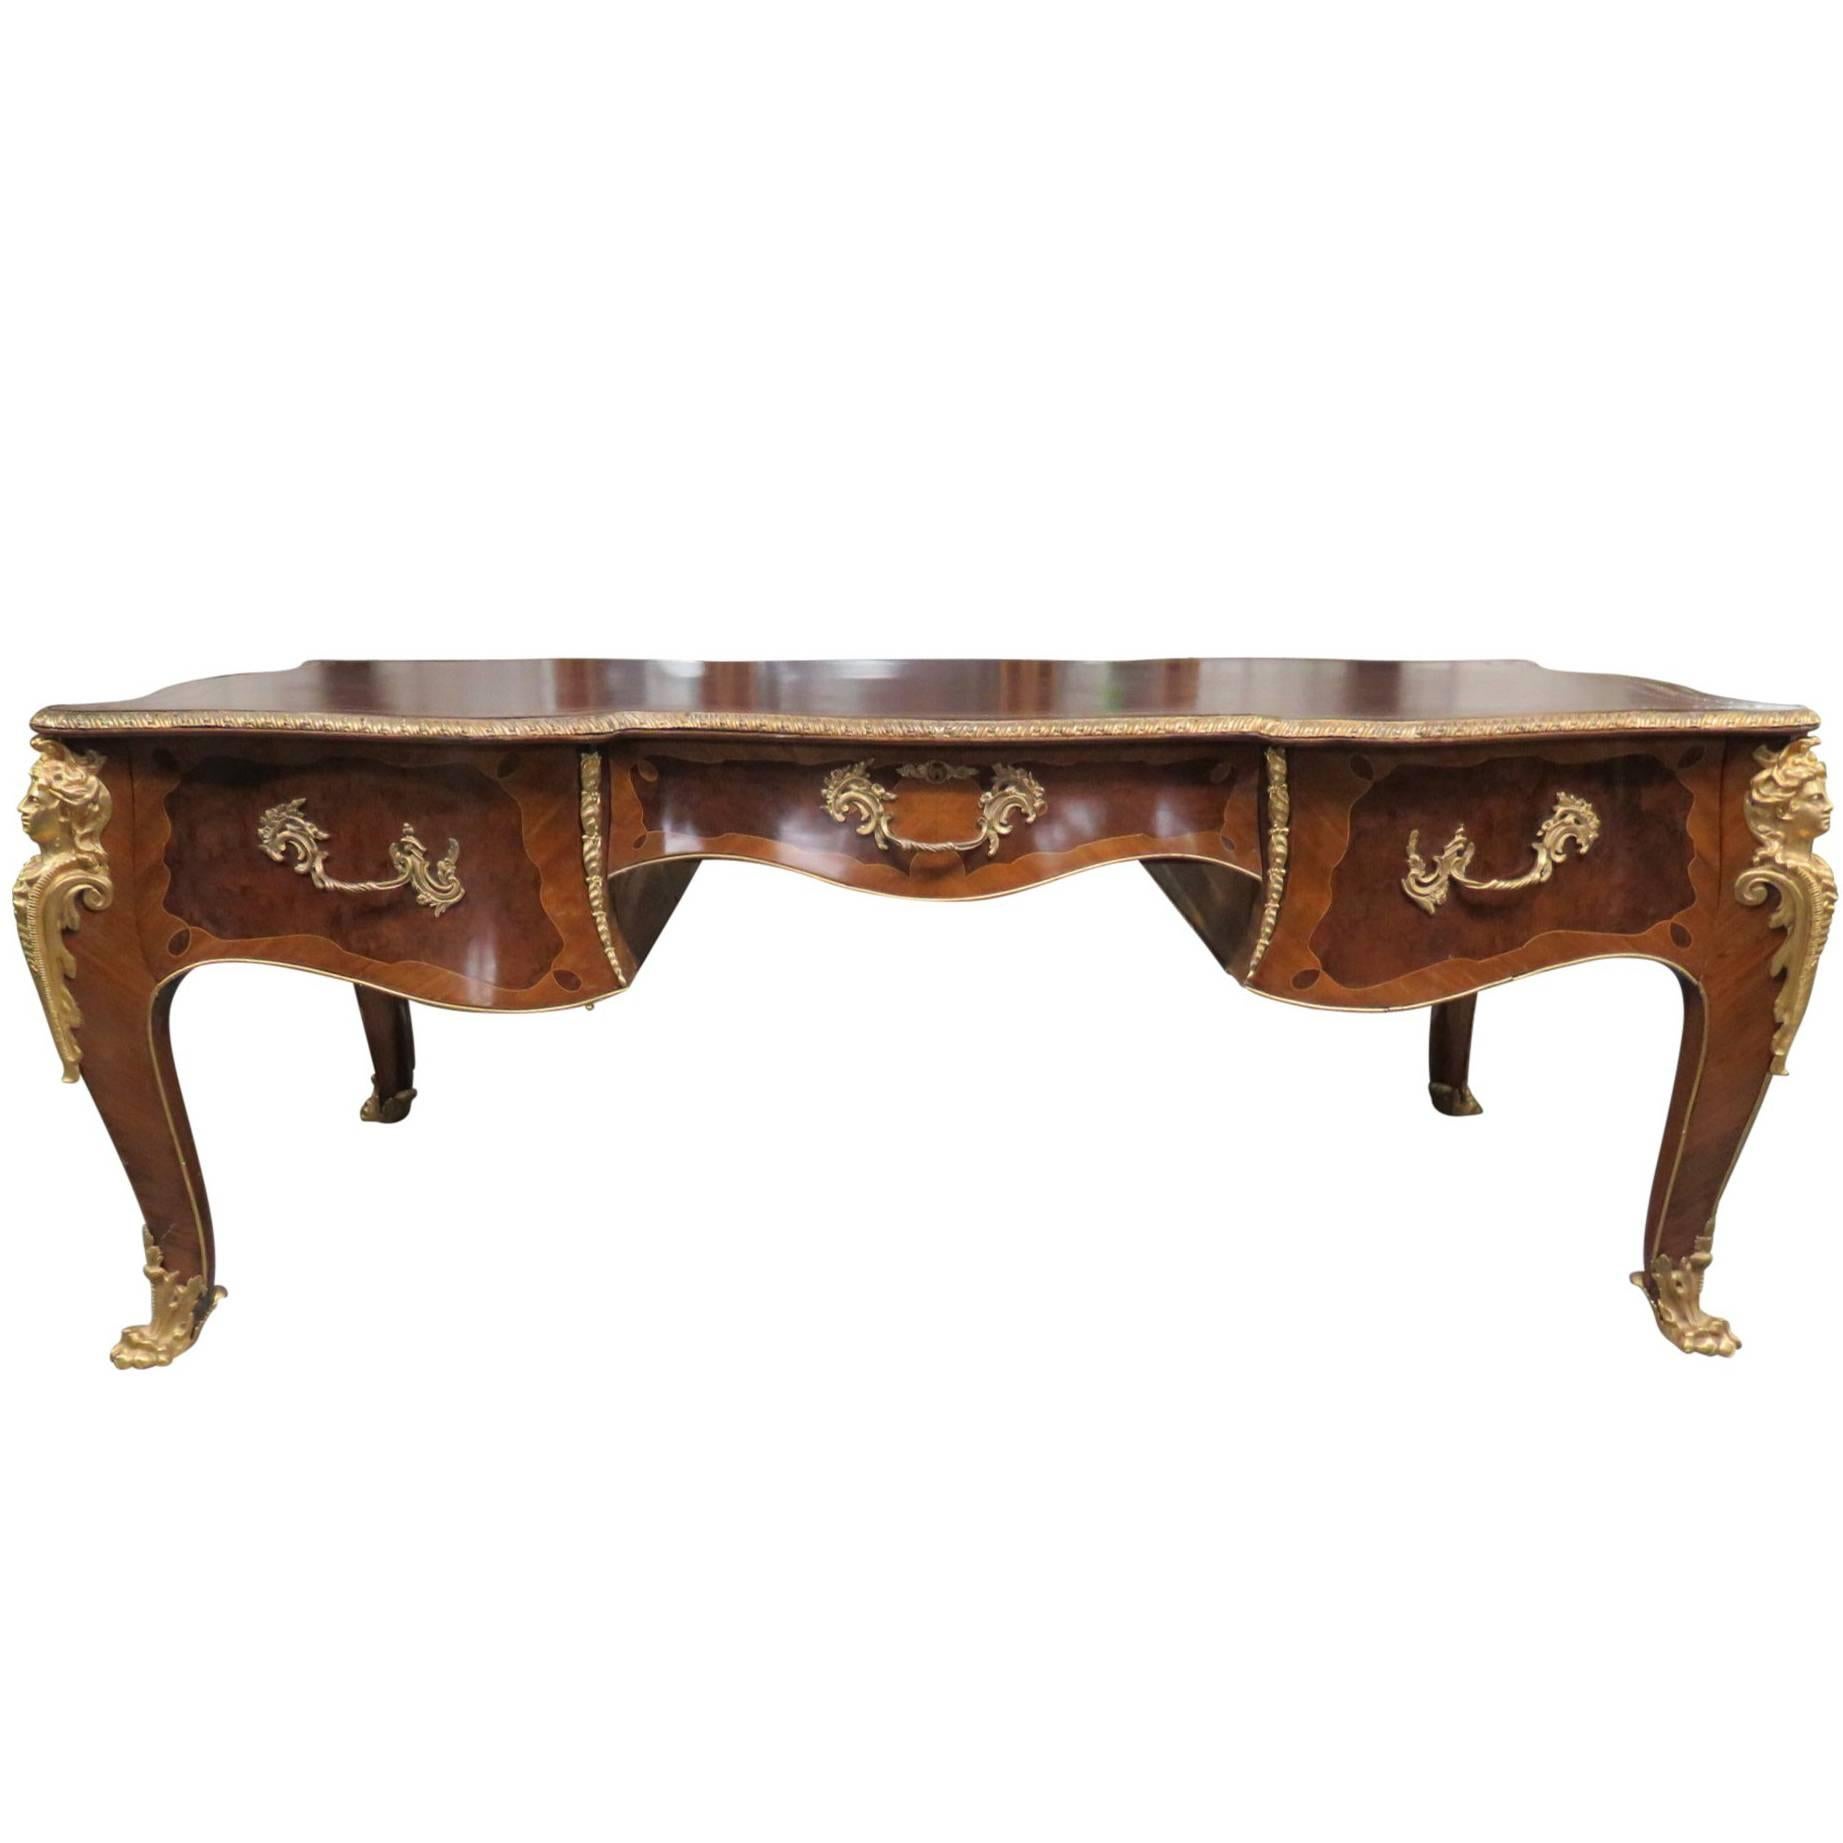 19th Century Leather Top Figural Inlaid Desk